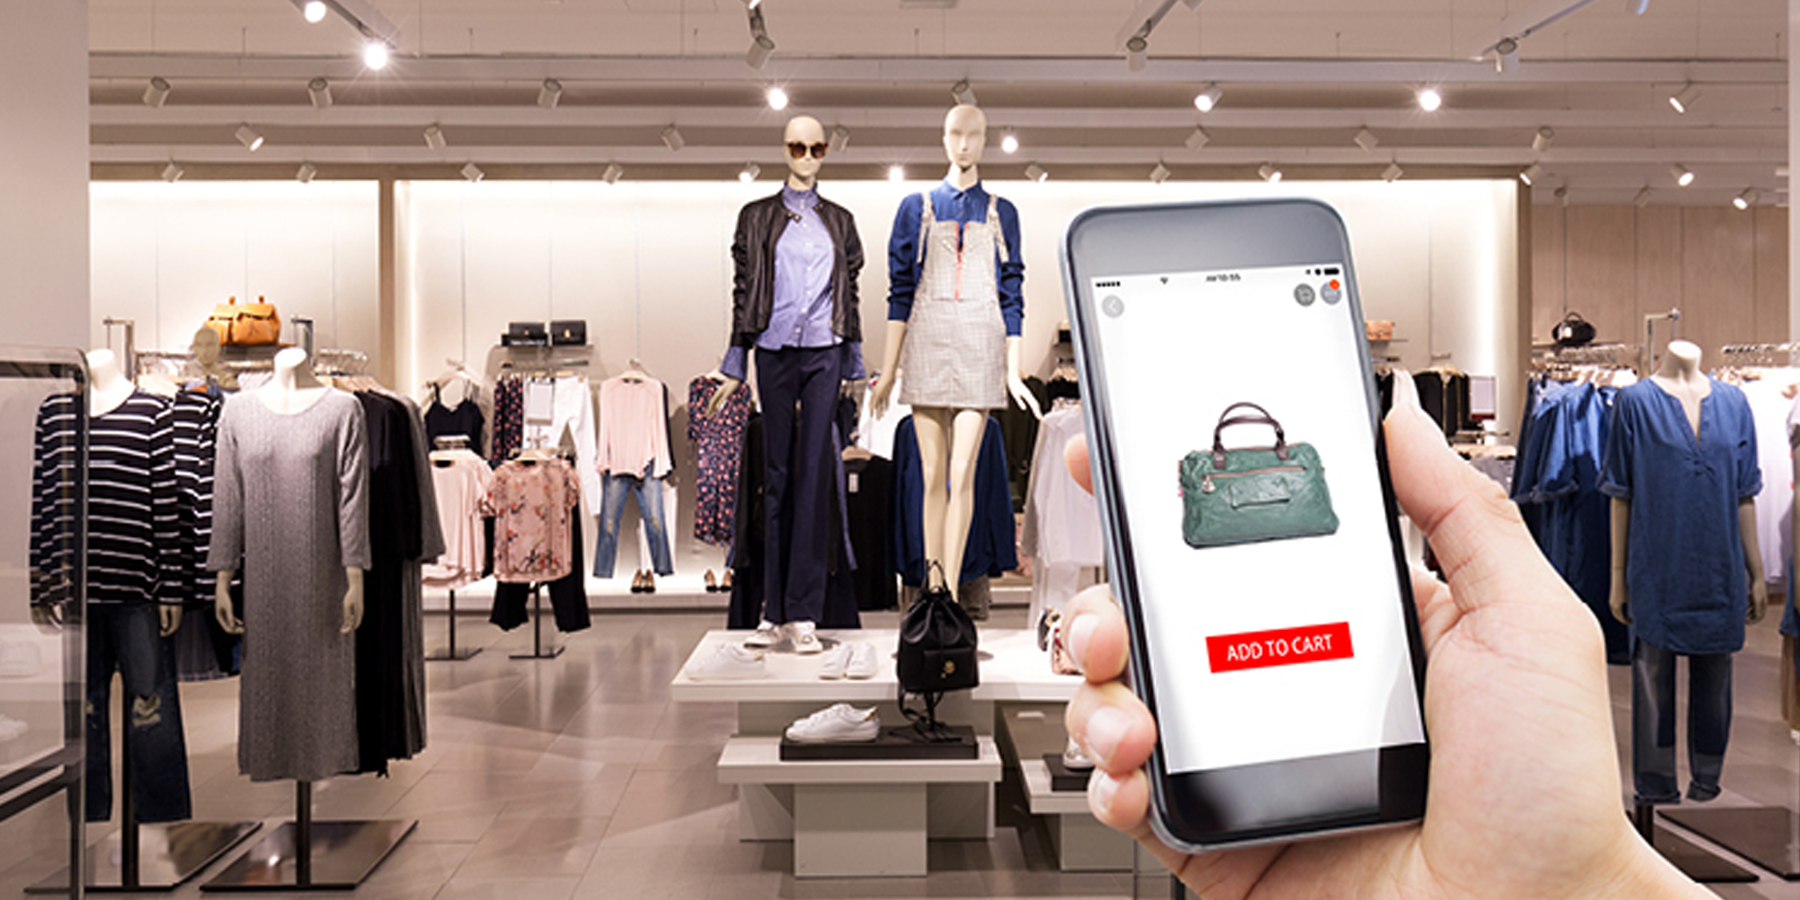 Why Retailers Value Wi-Fi and Location-Based Services for New Connected Customer Experiences